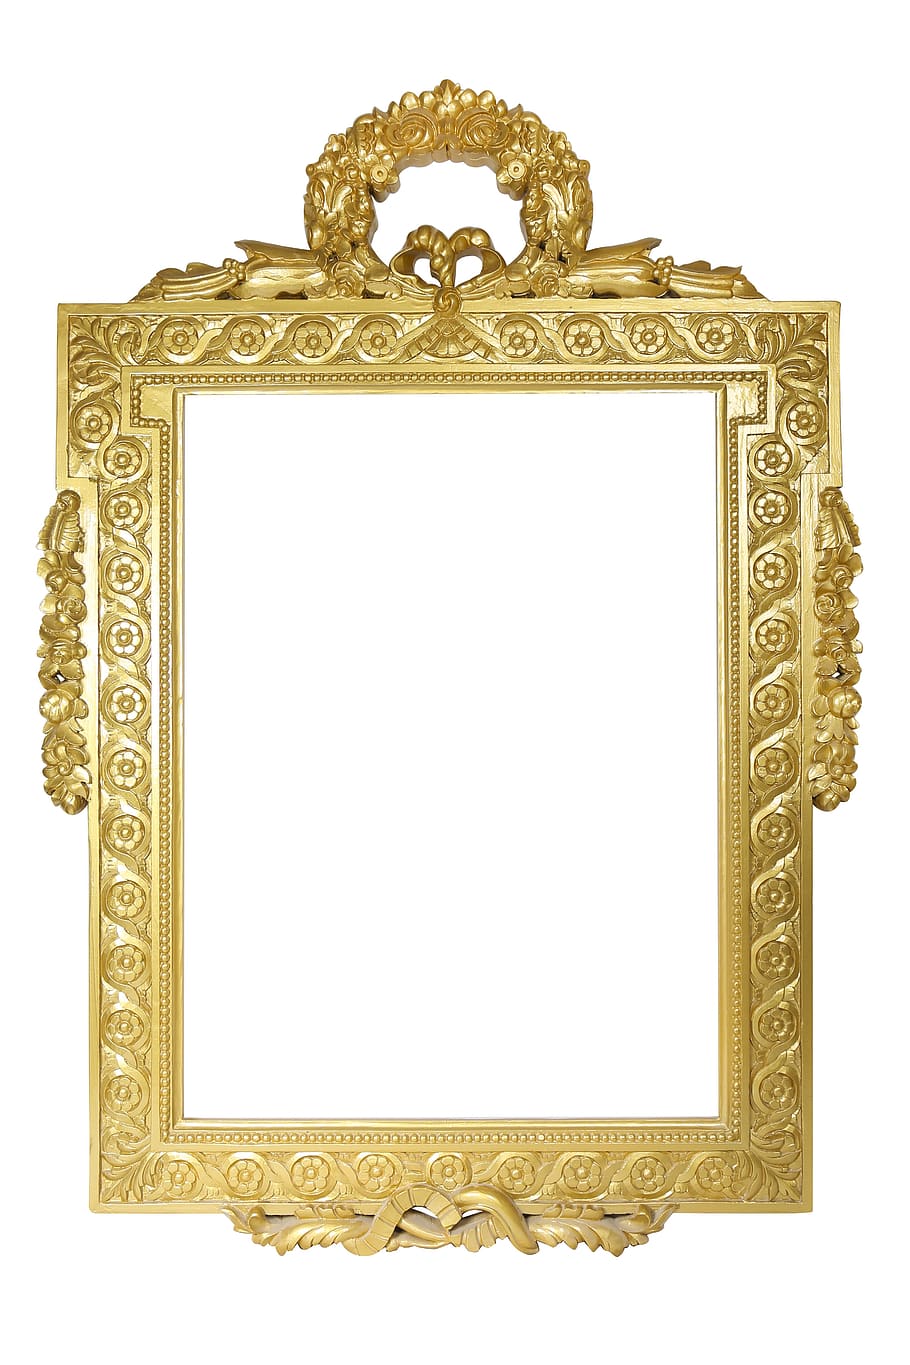 gold, golden, metallic, frame, wealth, attractive, wall, decoration, glossy, decor